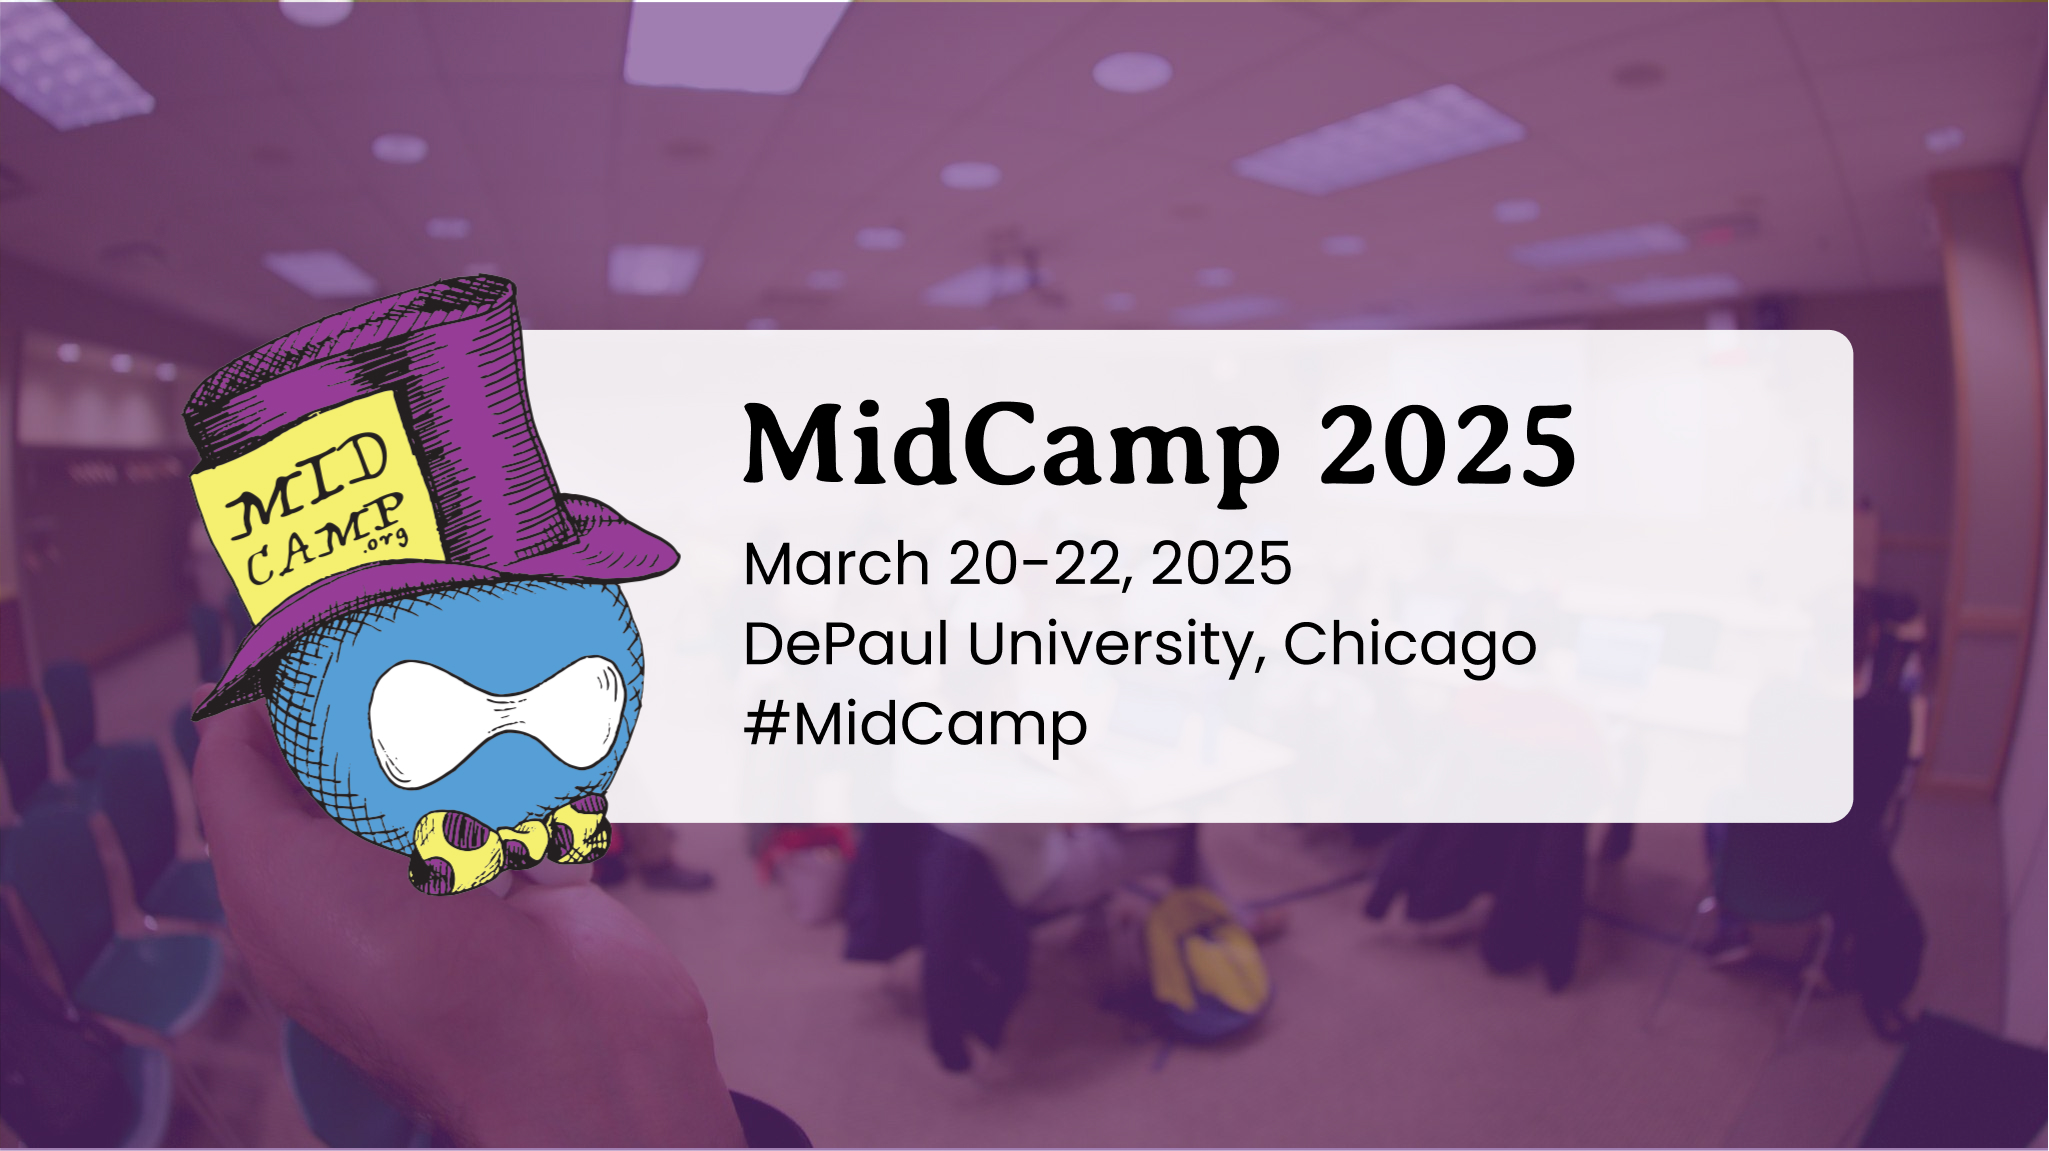 MidCamp 2025 is March 20 through 21, 2025 at DePaul University in Chicago